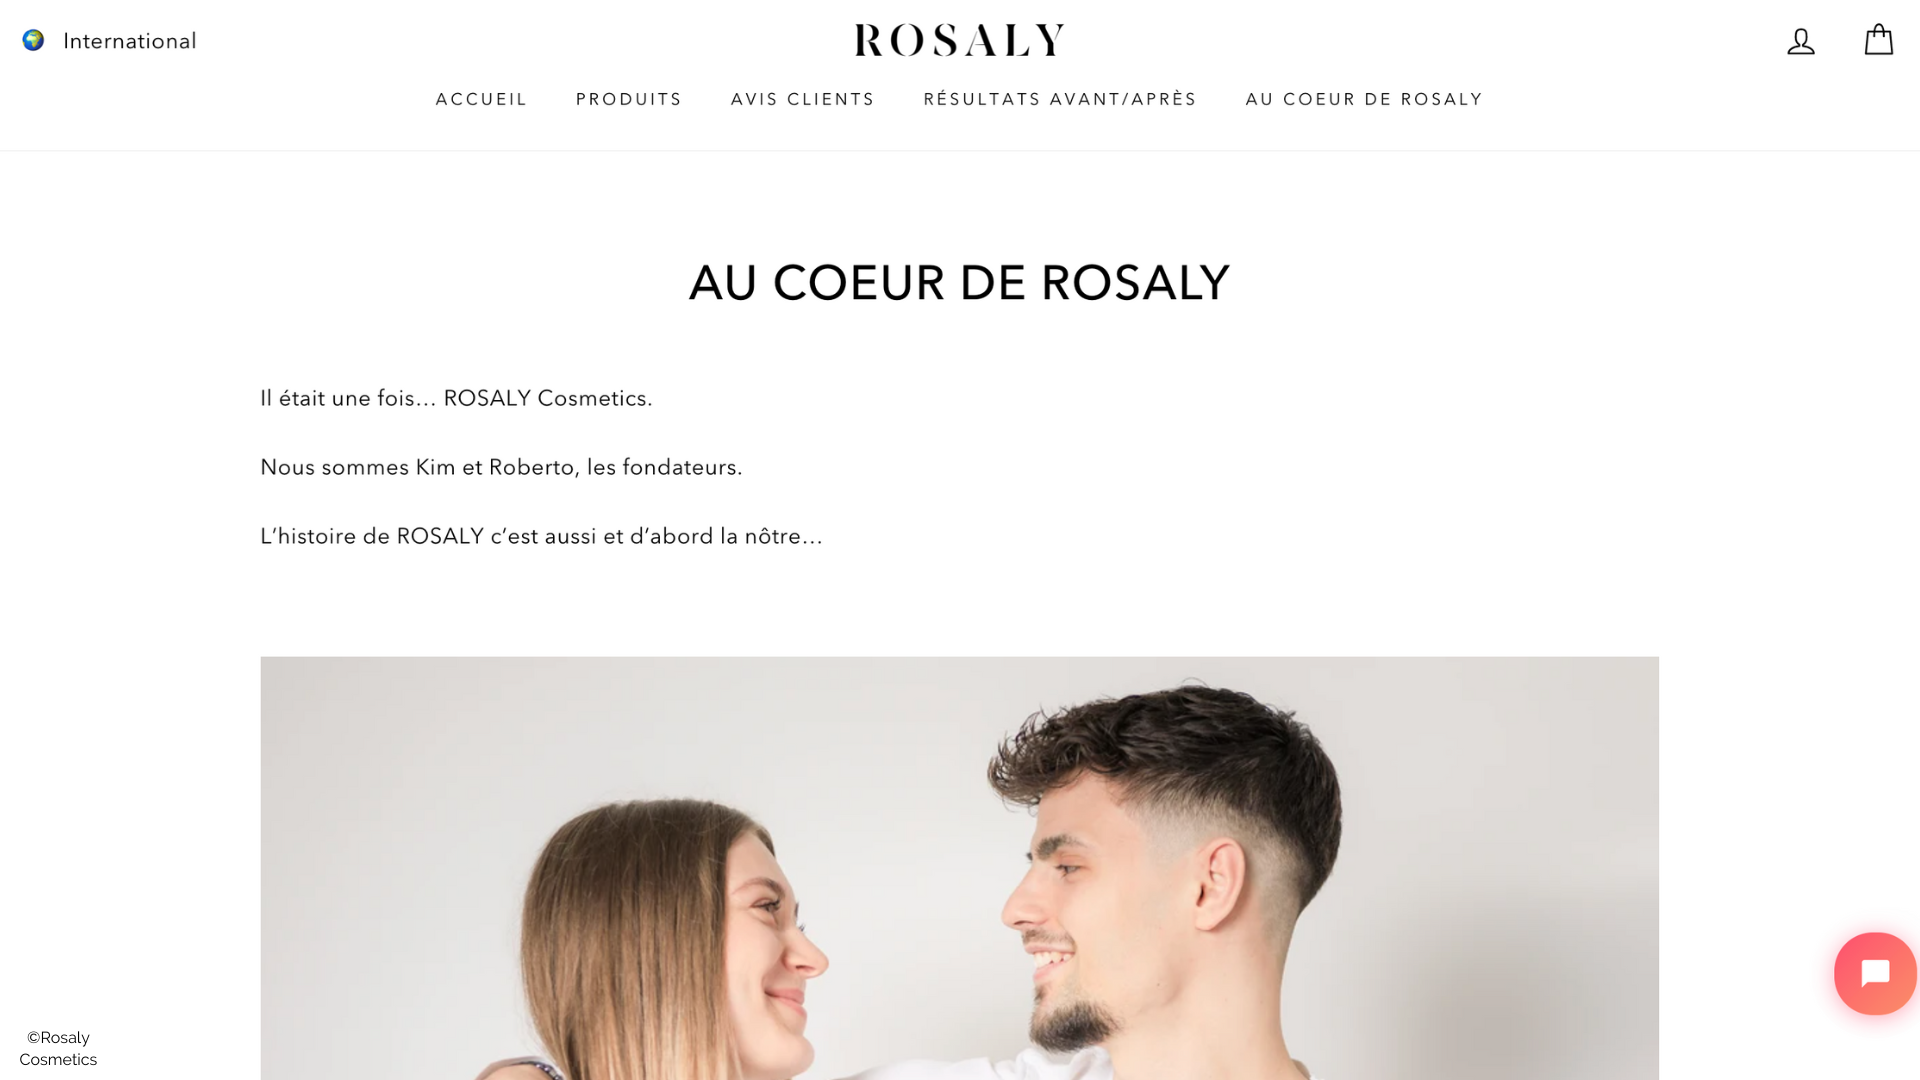 Projet client : Rosaly Cosmetics